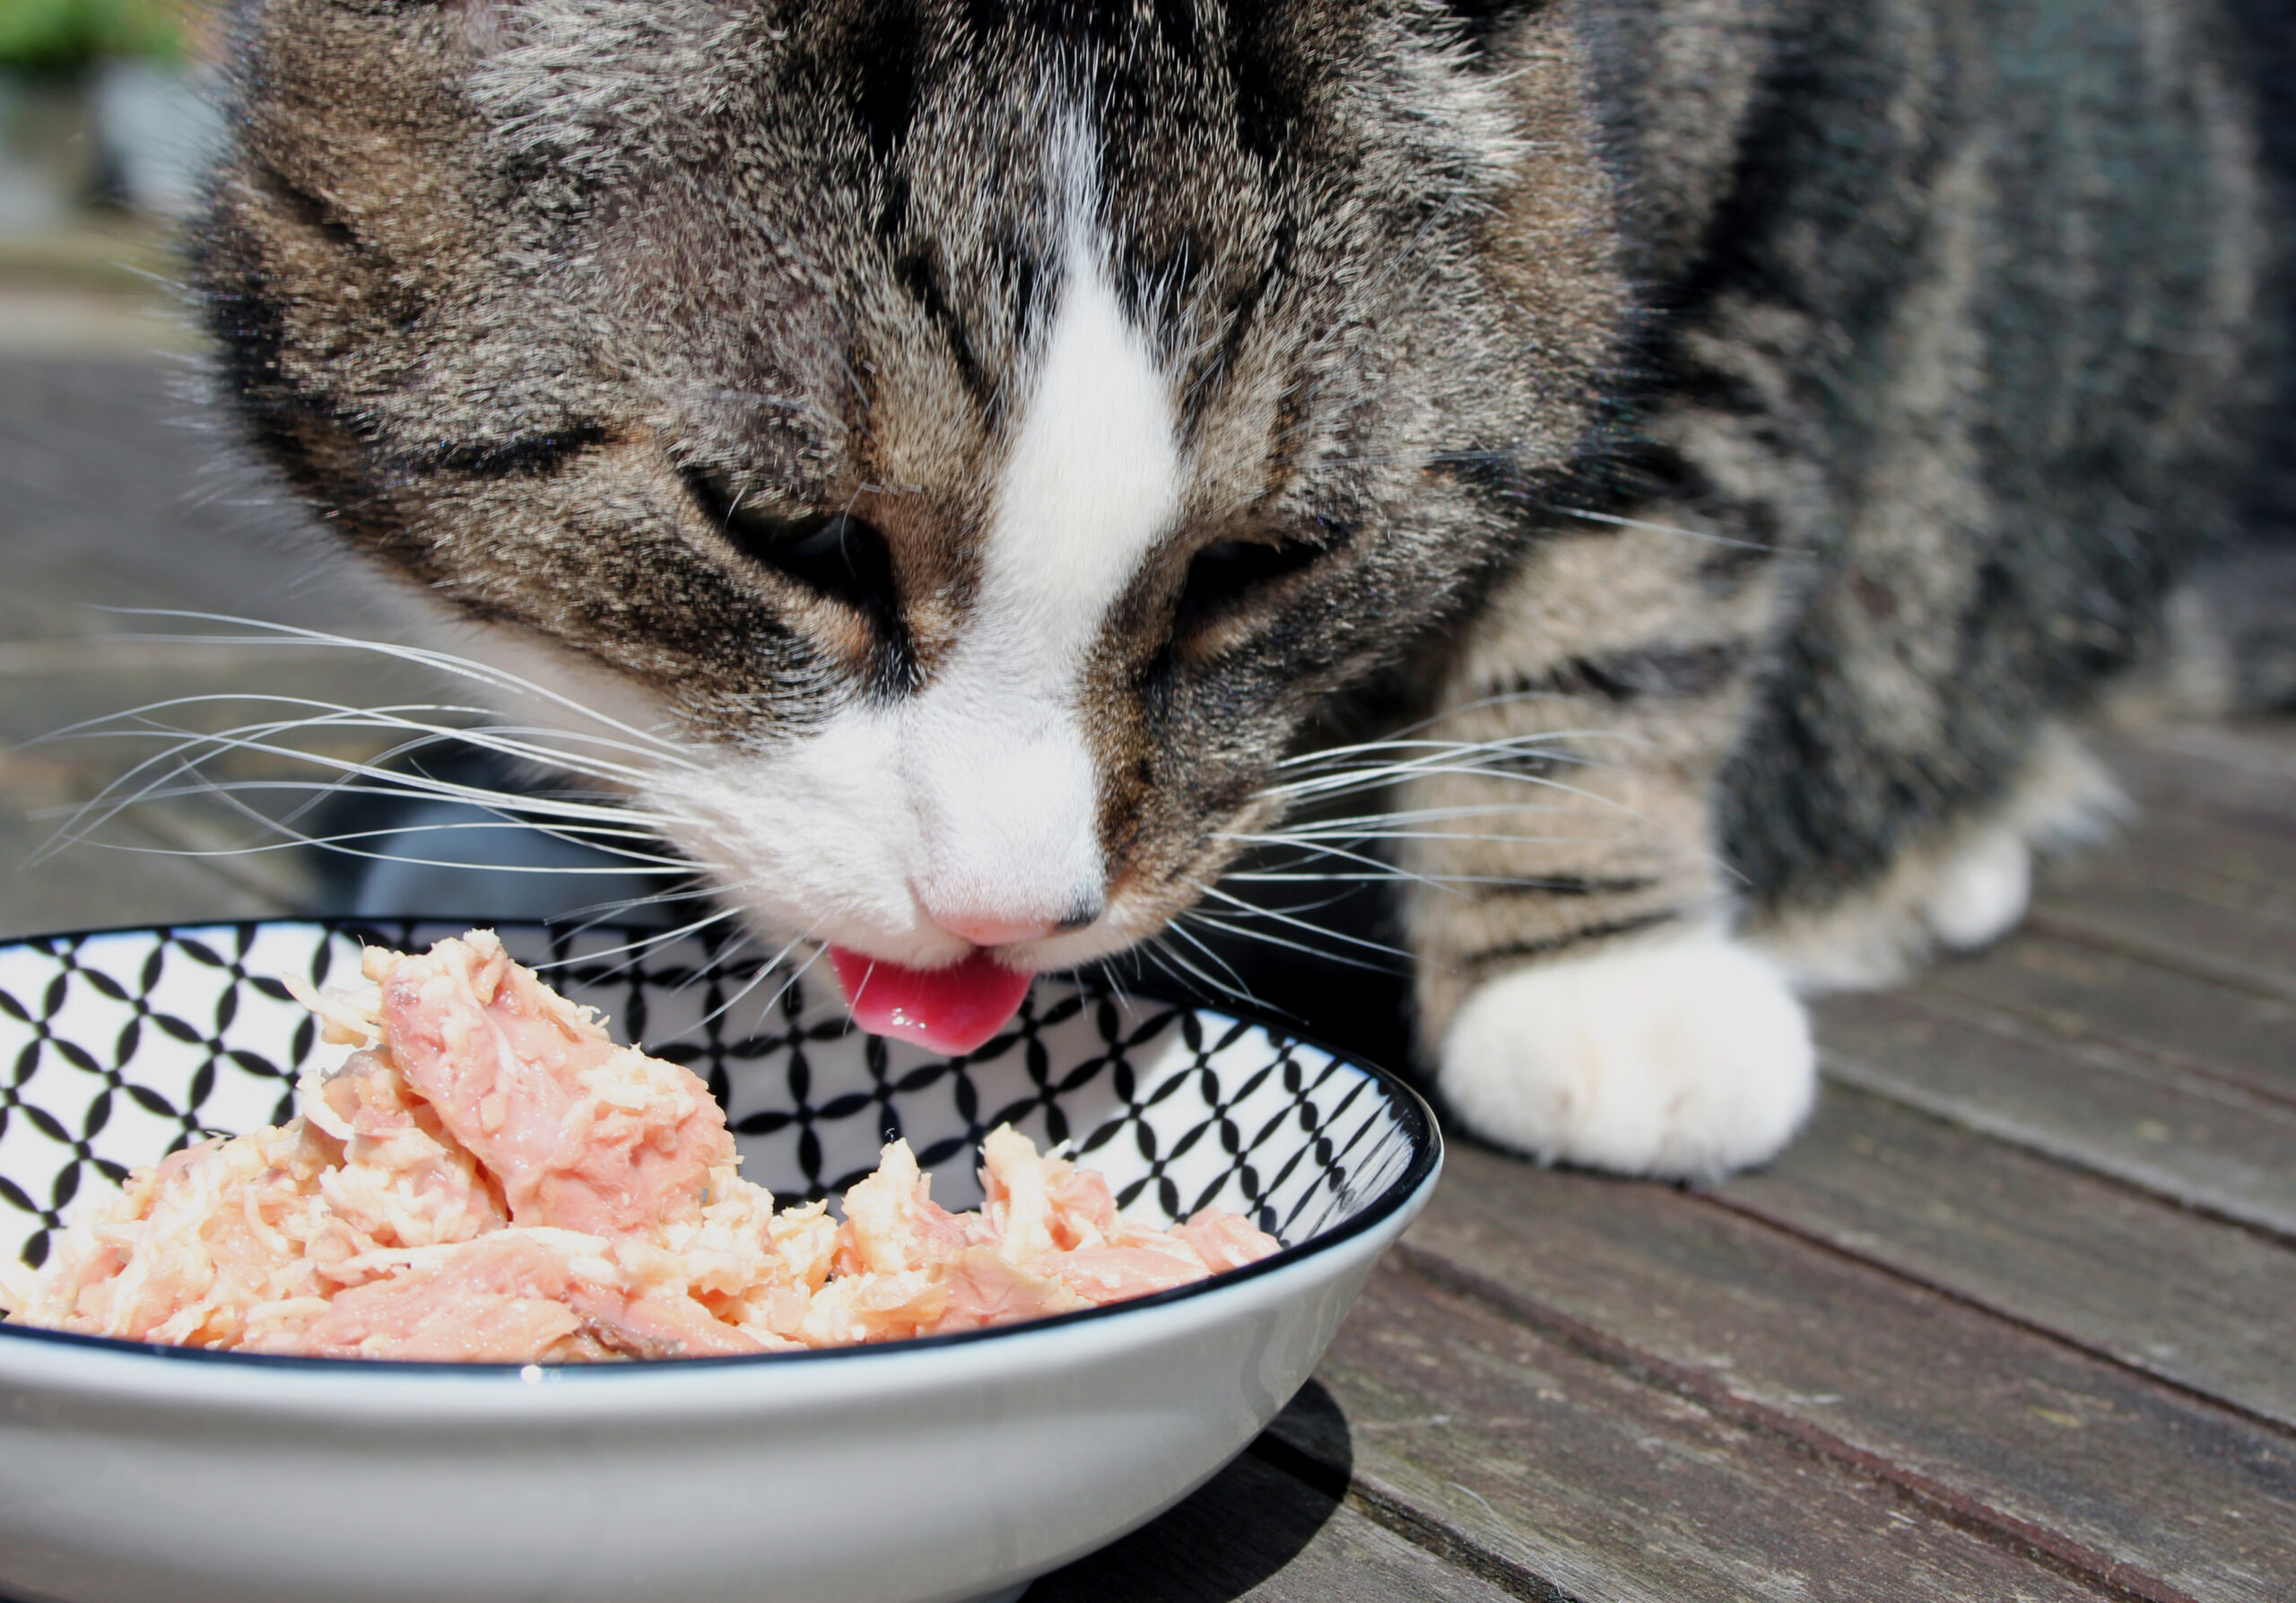 How To Make High-Protein Cat Food (DIY)